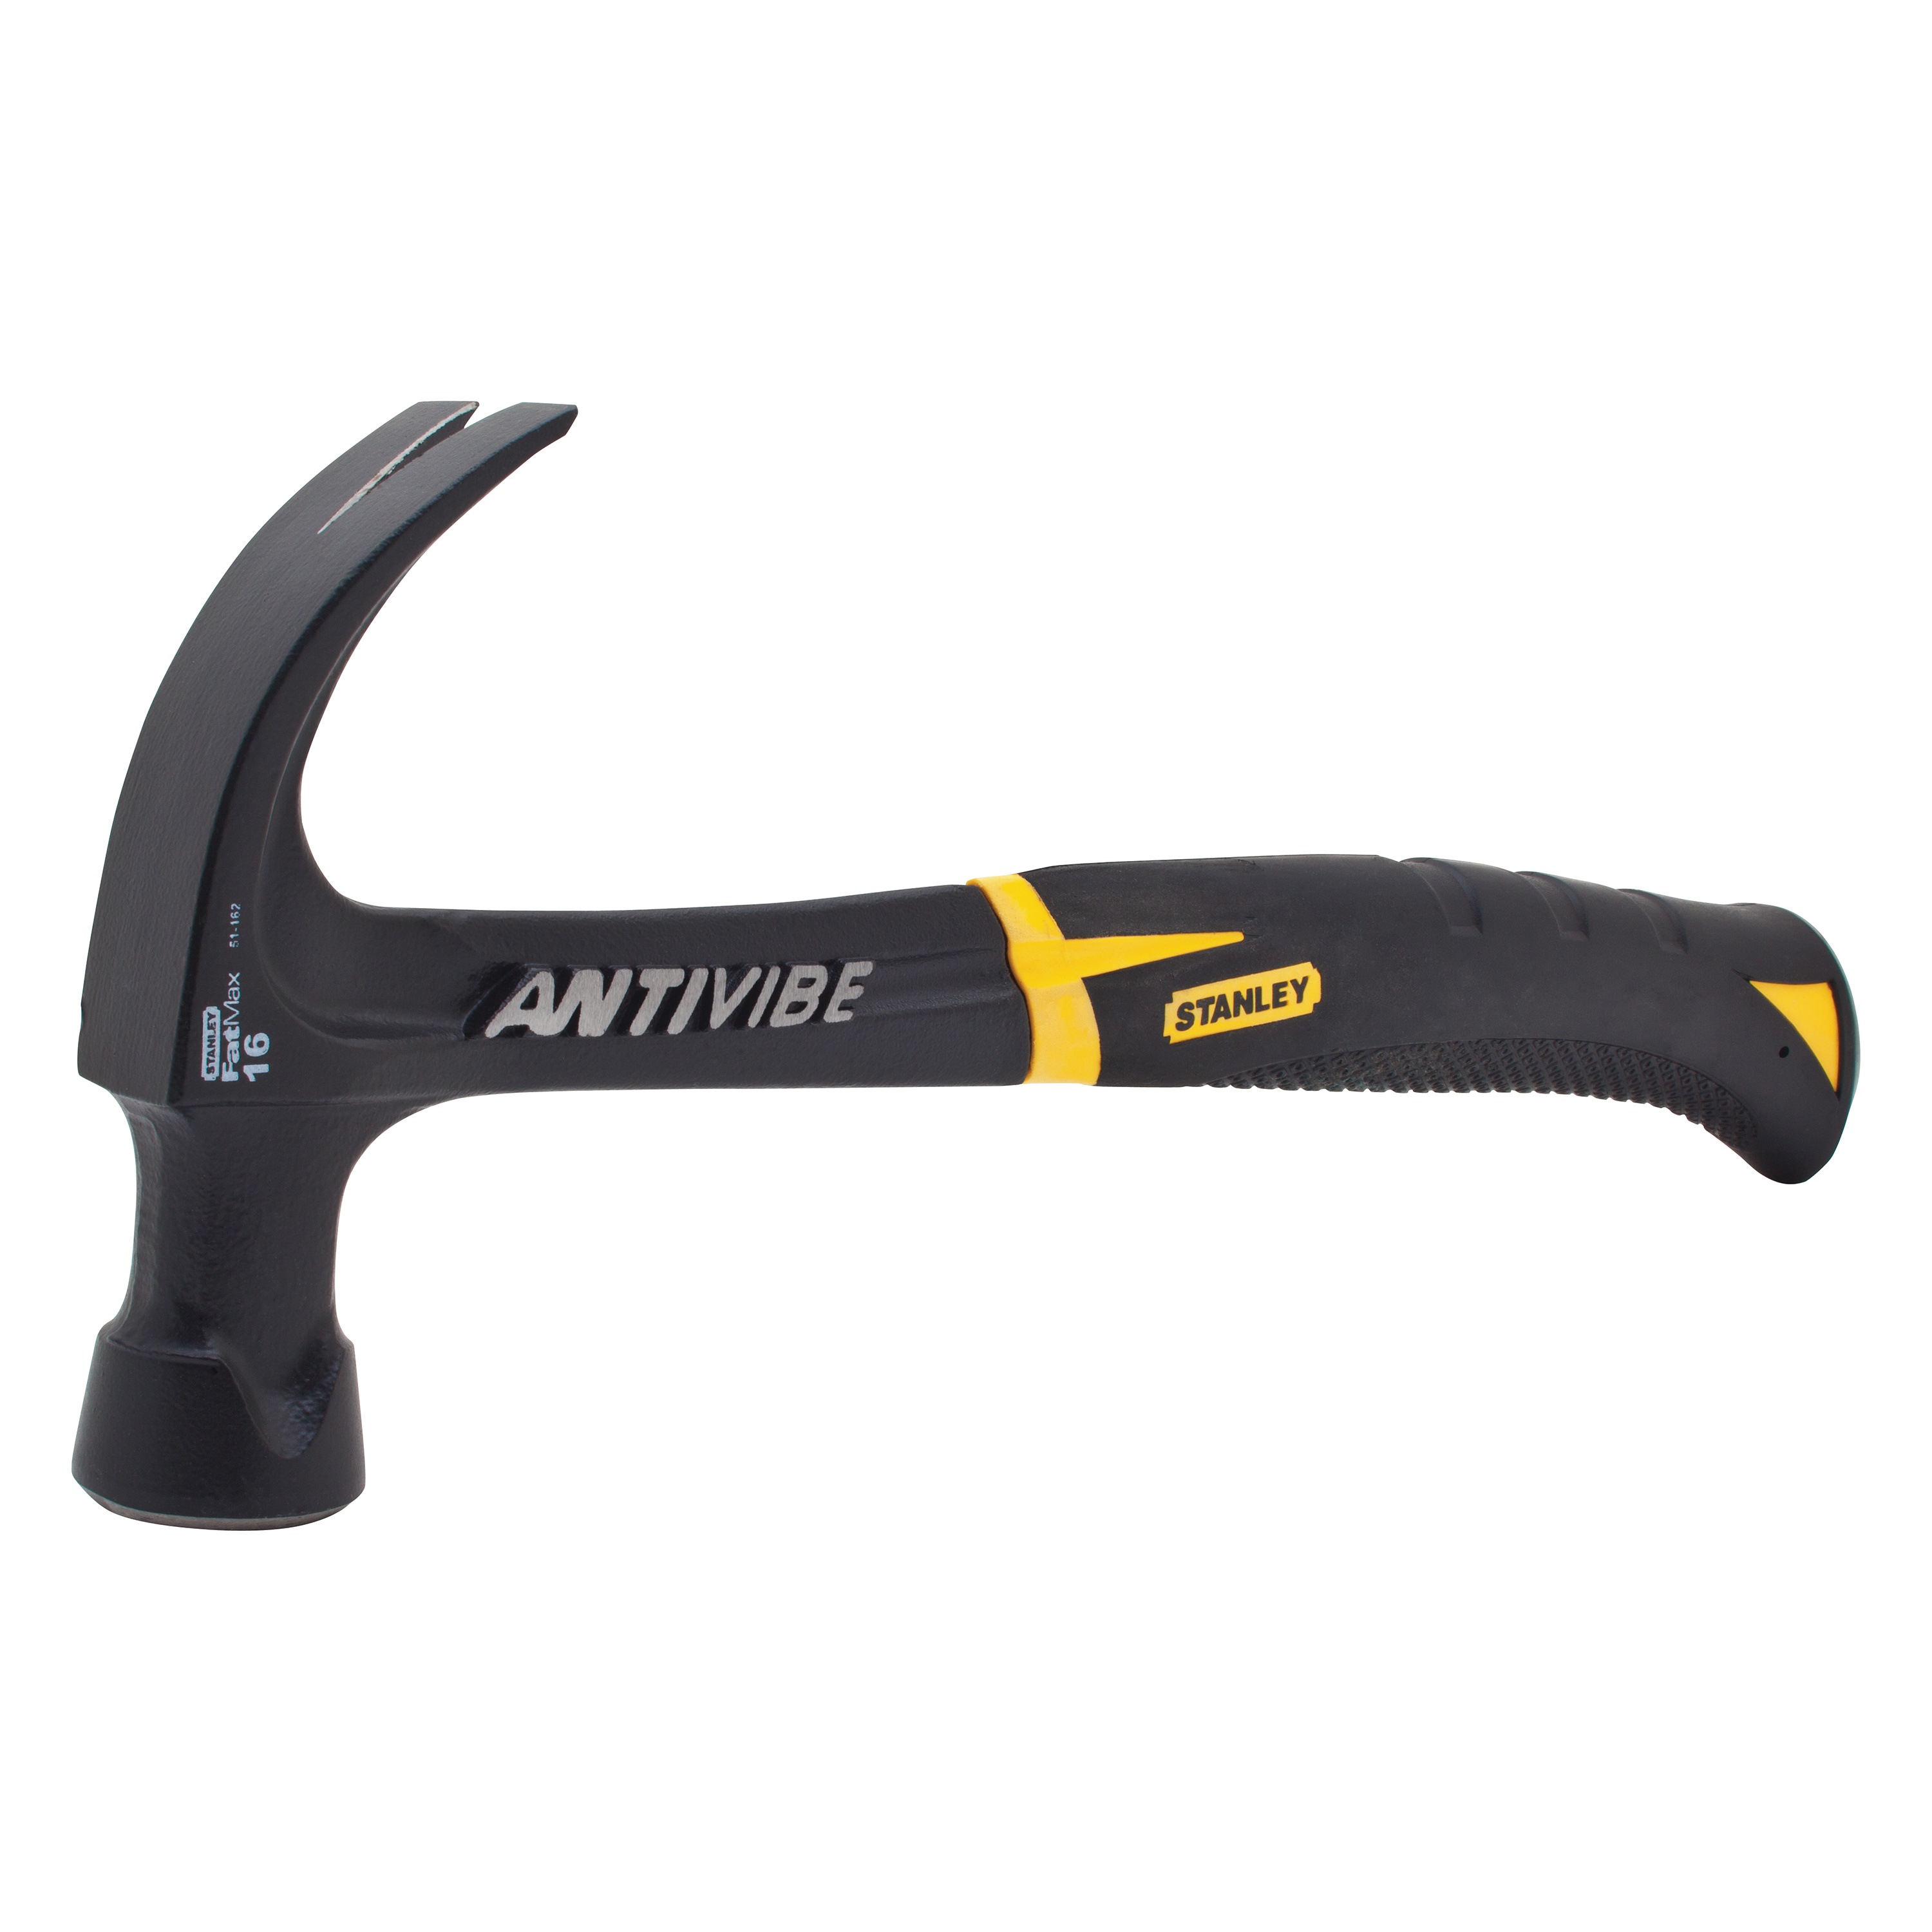 Stanley Tools - 16 oz FATMAX AntiVibe Curve Claw Nailing Hammer - 51-162